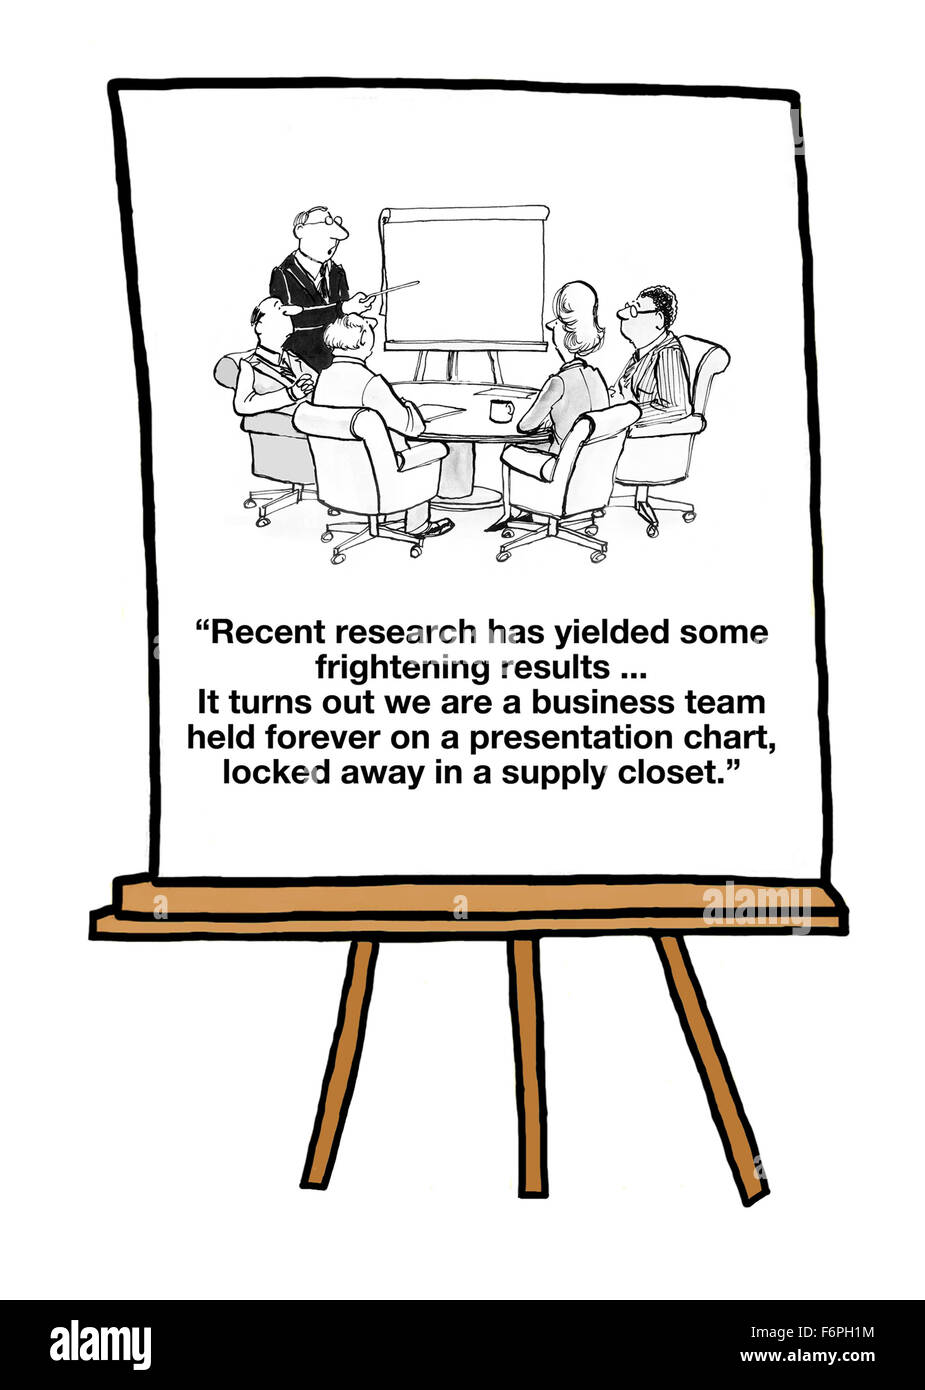 Business cartoon about a business team stuck within a presentation chart that is locked in a supply closet forever. Stock Photo